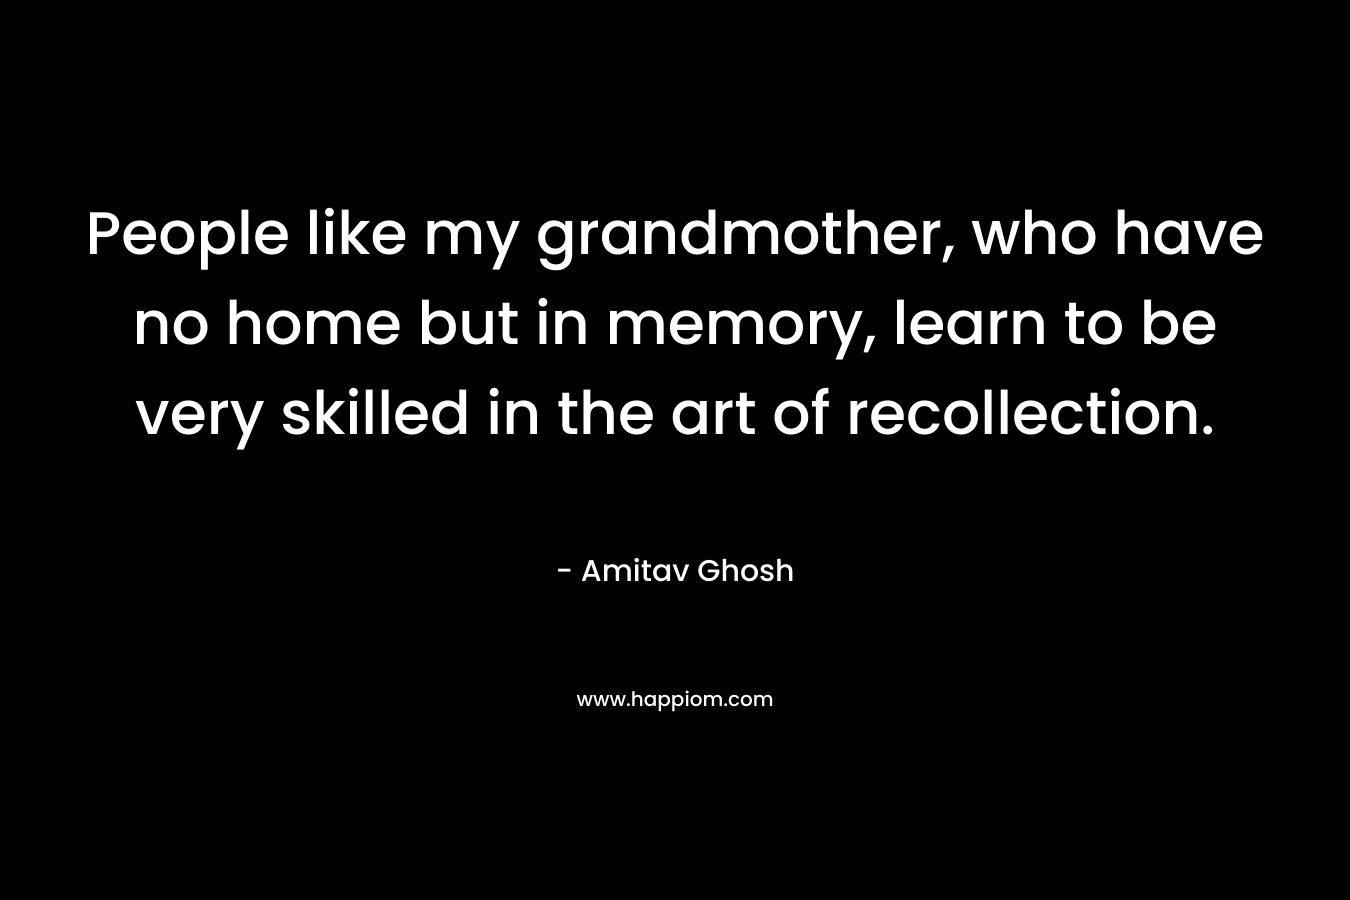 People like my grandmother, who have no home but in memory, learn to be very skilled in the art of recollection. – Amitav Ghosh